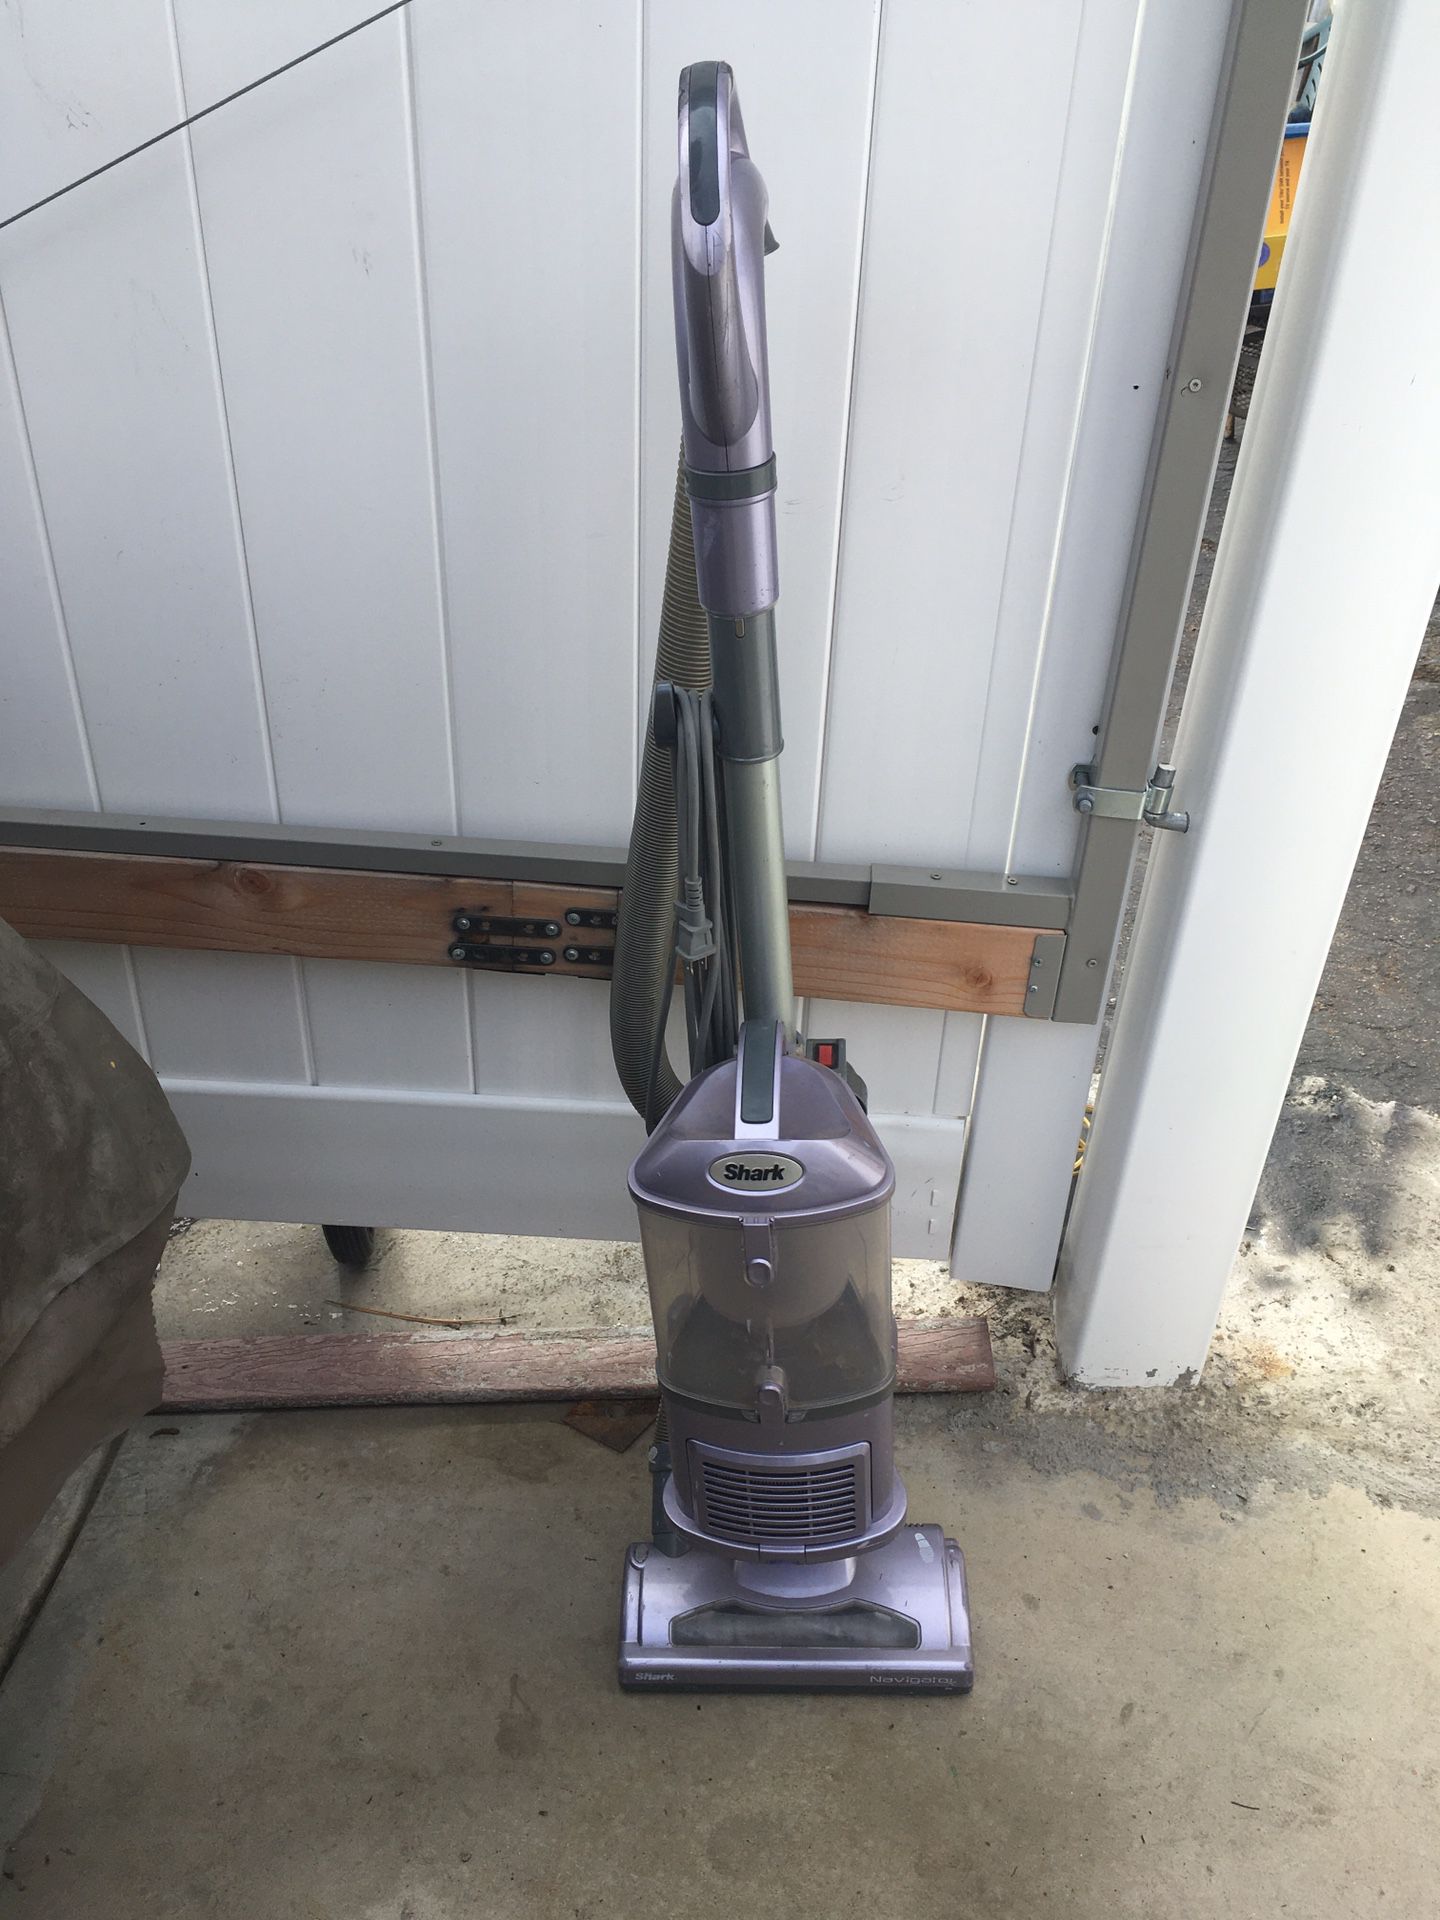 Shark vacuum in great working and cosmetic shape